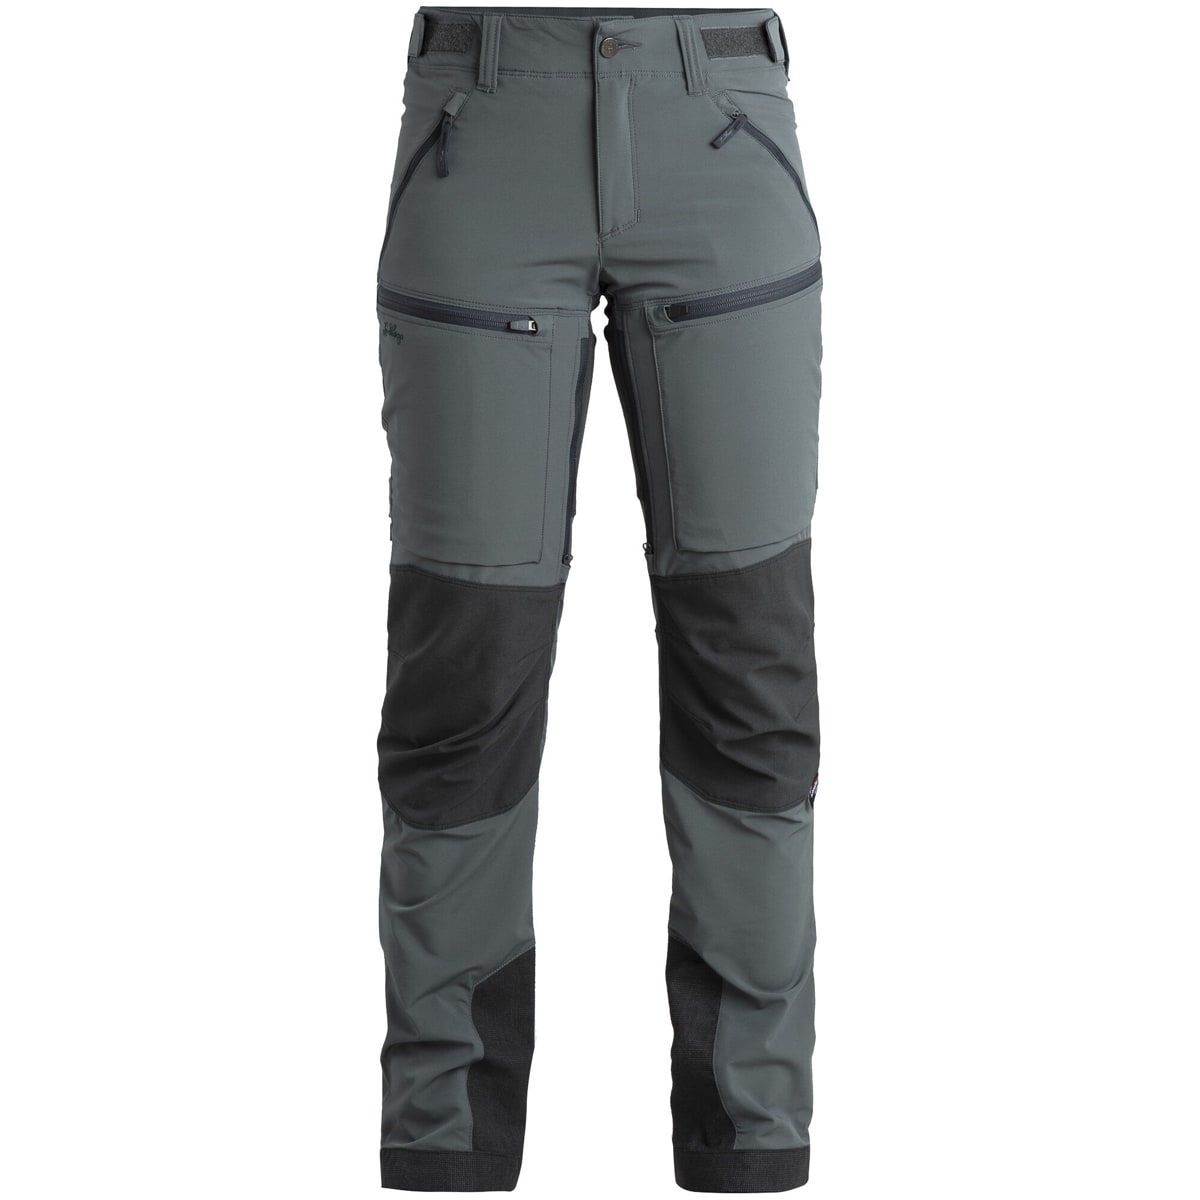 Lundhags Askro Pro Ws Pant Dark Agave/Charcoal